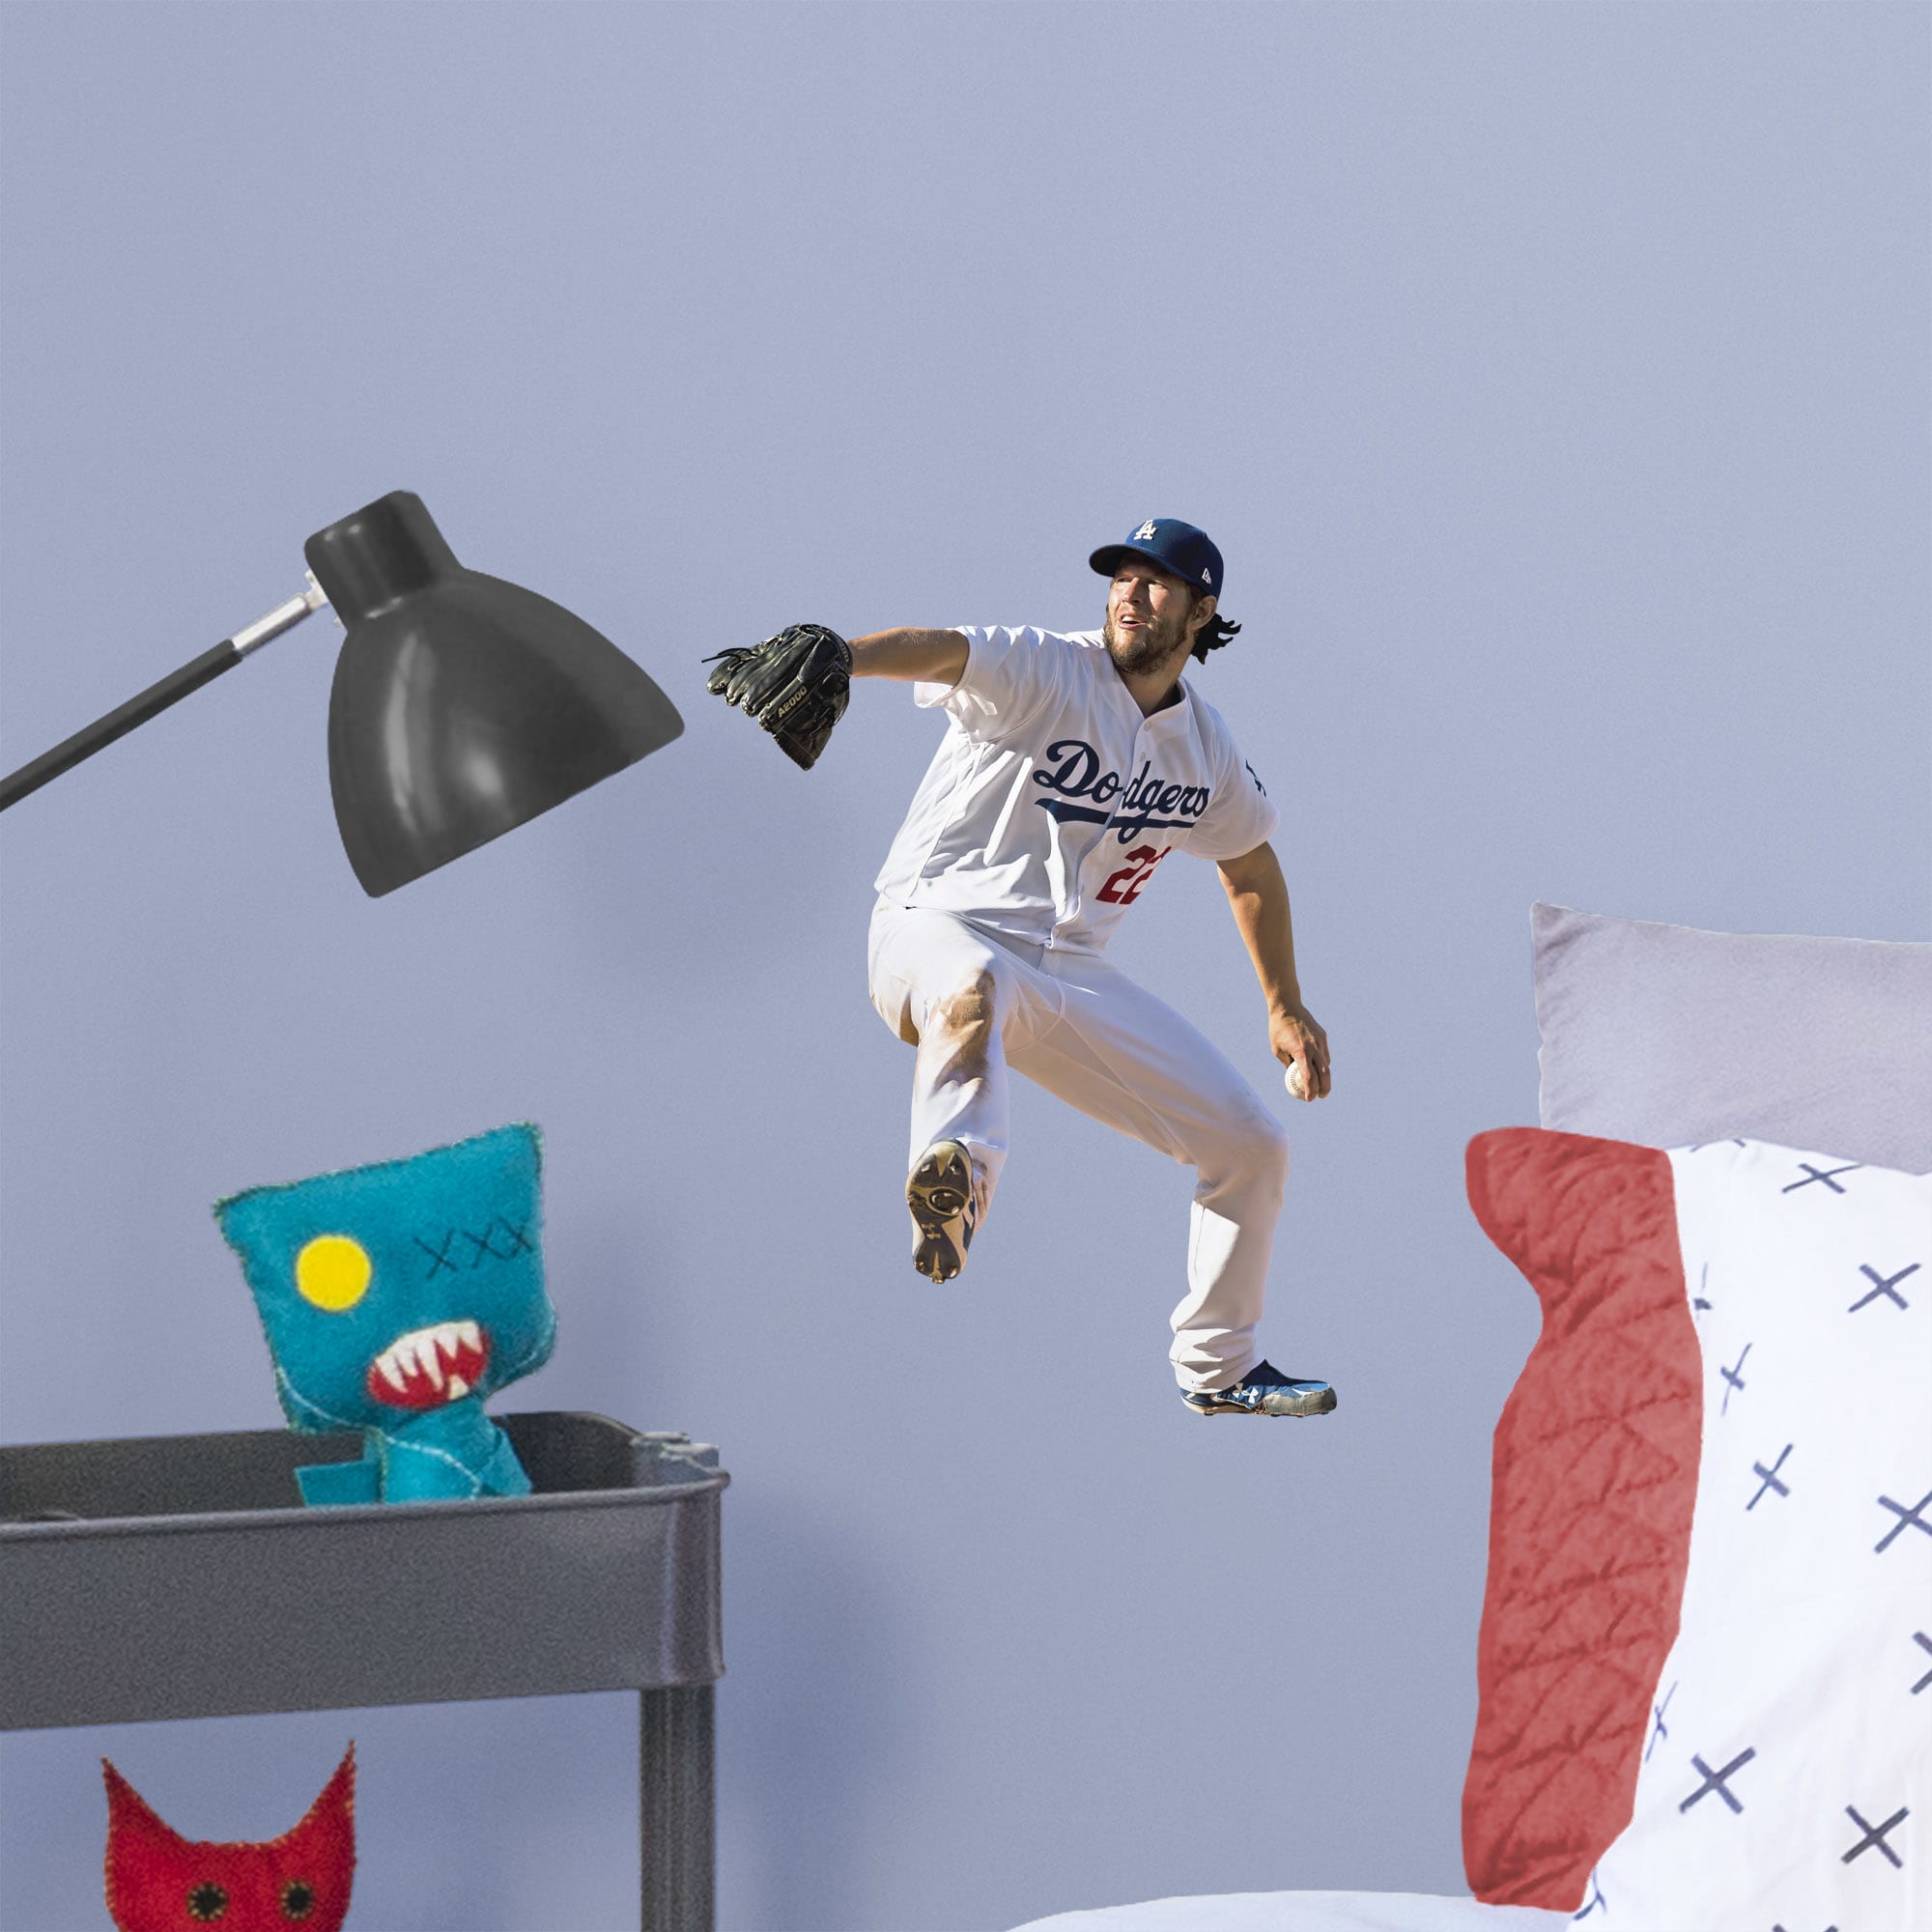 Clayton Kershaw for Los Angeles Dodgers - Officially Licensed MLB Removable Wall Decal Large by Fathead | Vinyl